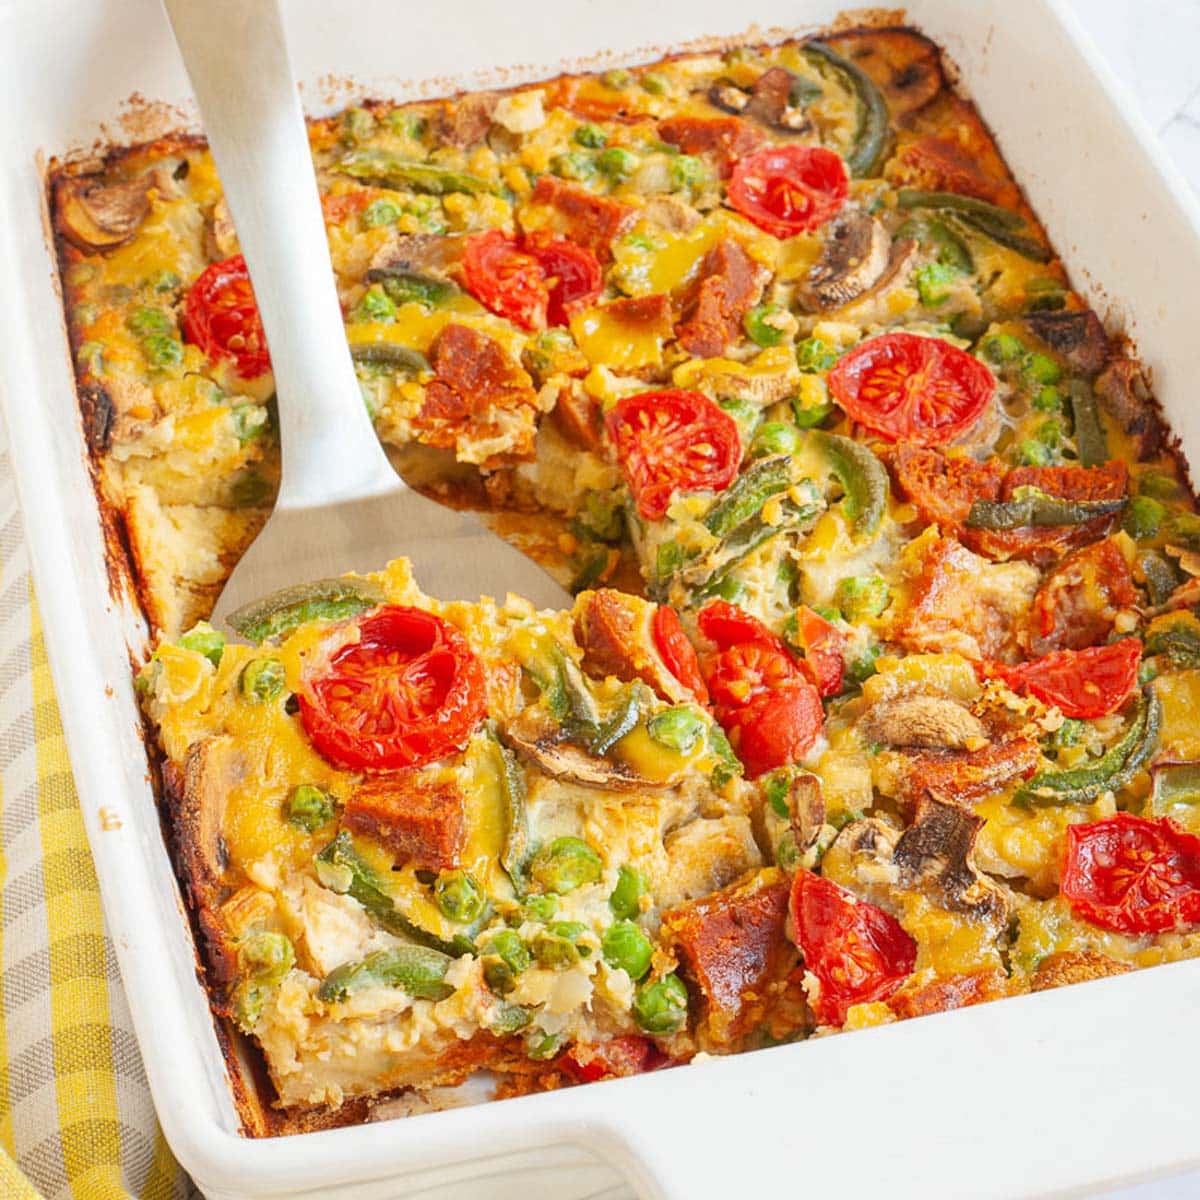 Cherry tomatoes, mushroom slices, bell pepper slices on top of a yellow cake-like dough is in a white casserole dish. A slice served on a white plate is in the background